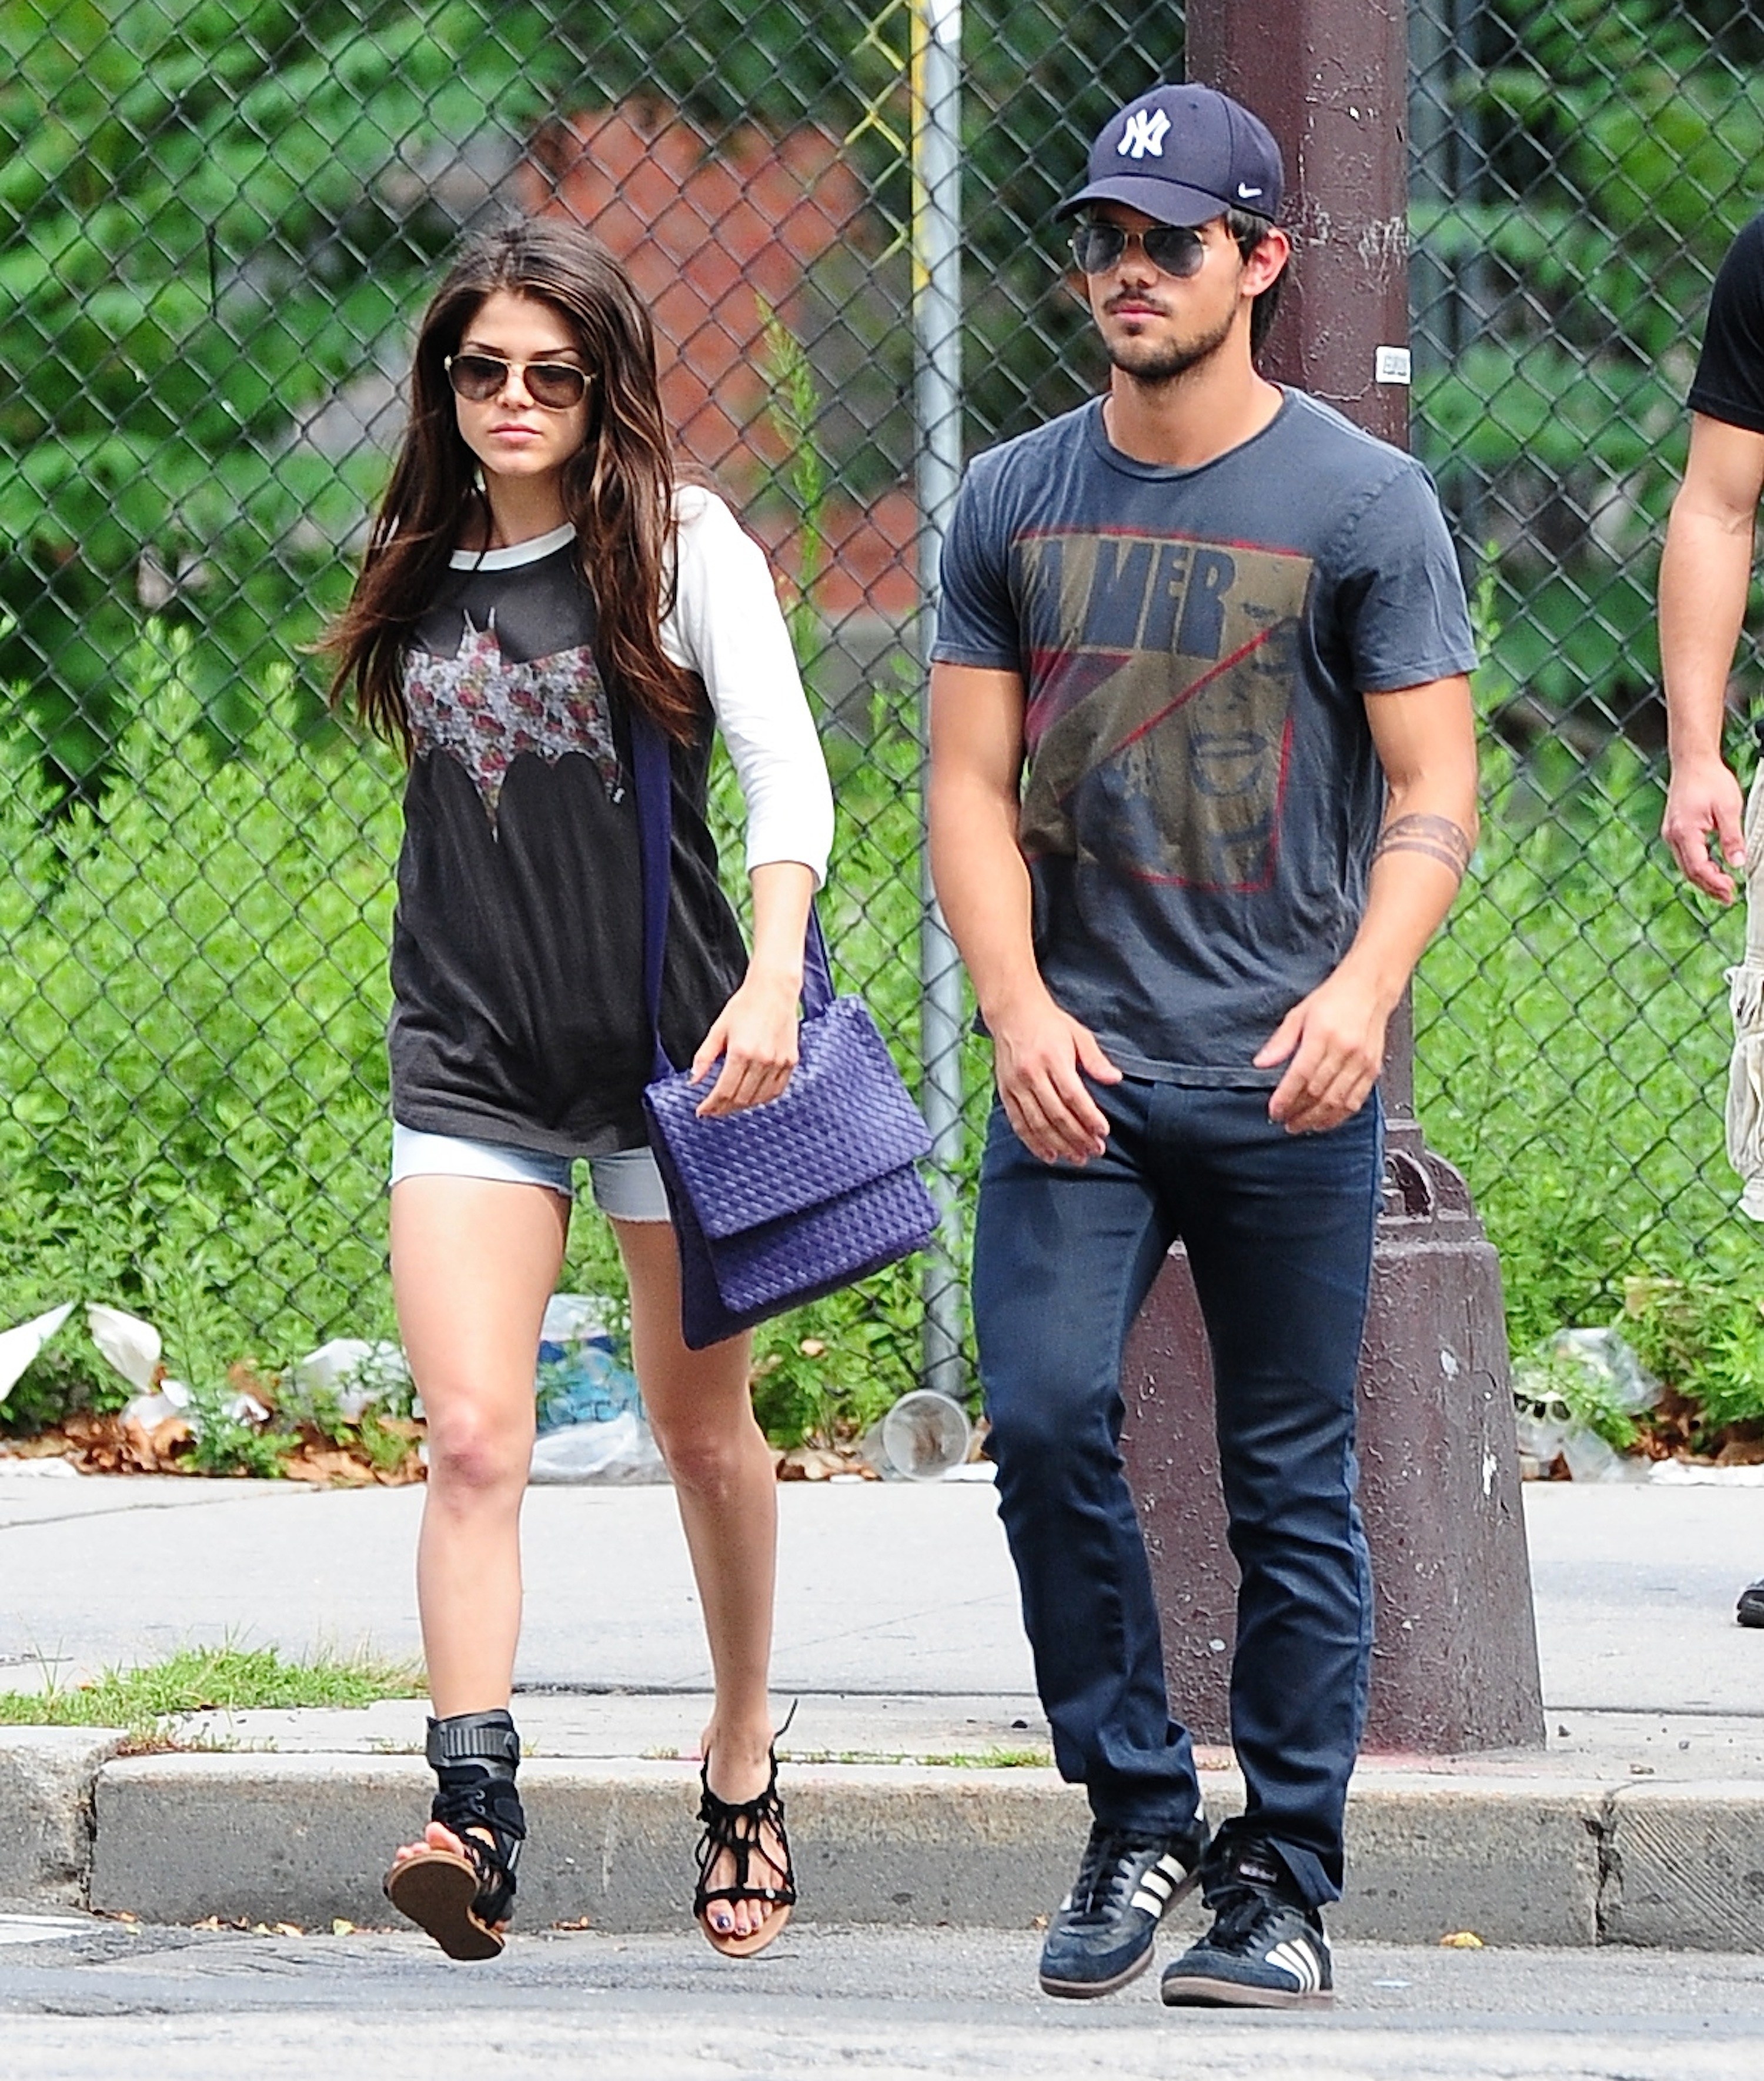 Taylor taking a walk with a companion while wearing sunglasses and a baseball cap